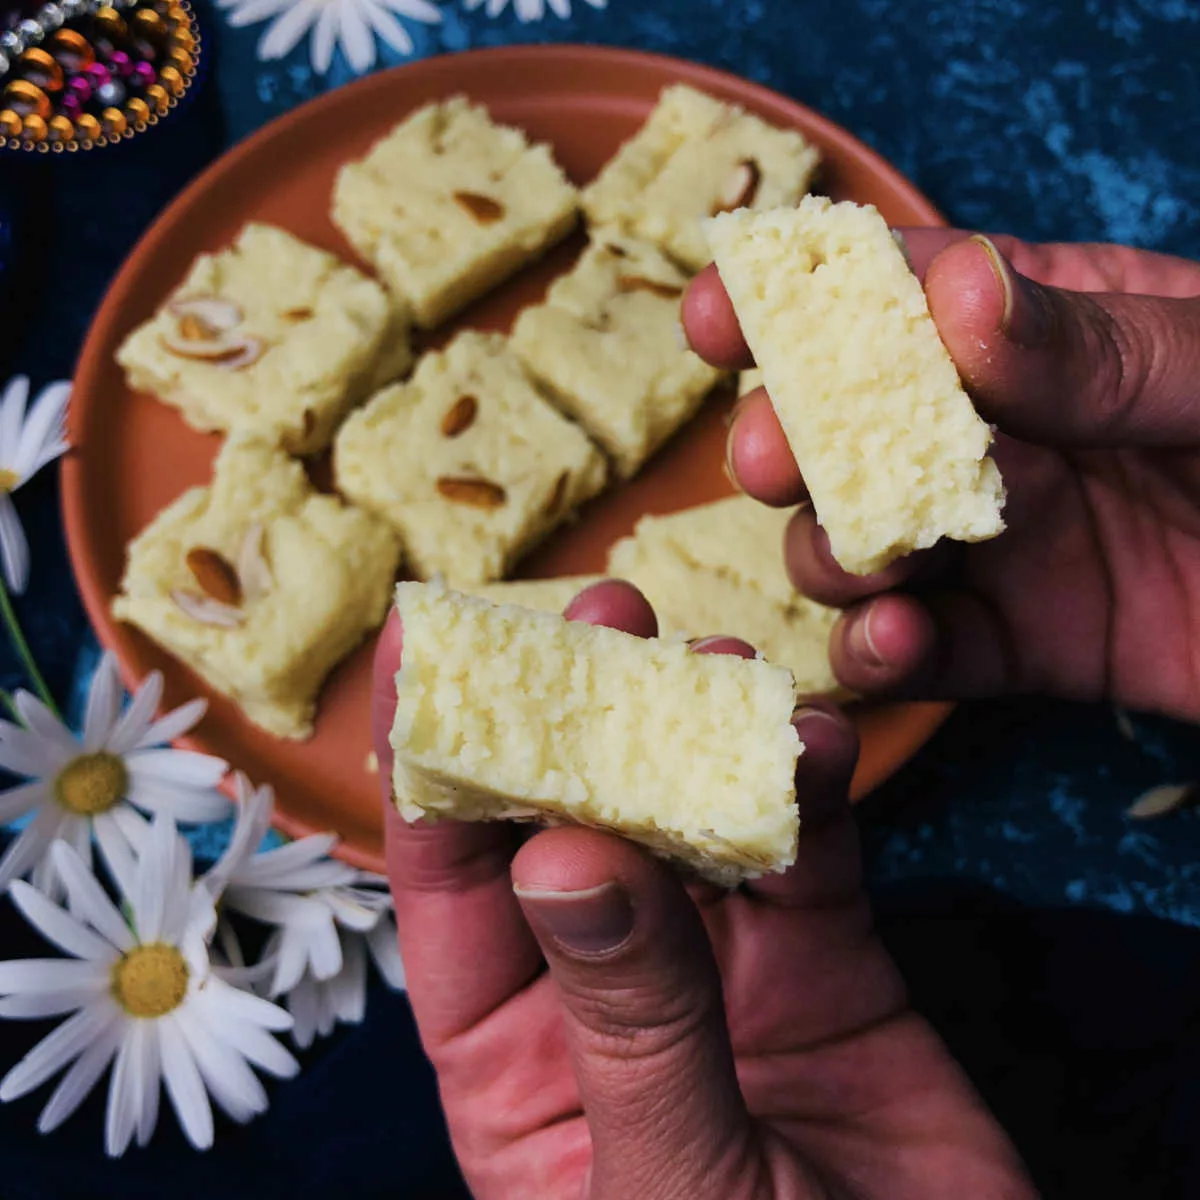 Milk powder barfi cut into two pieces to show the interior texture.